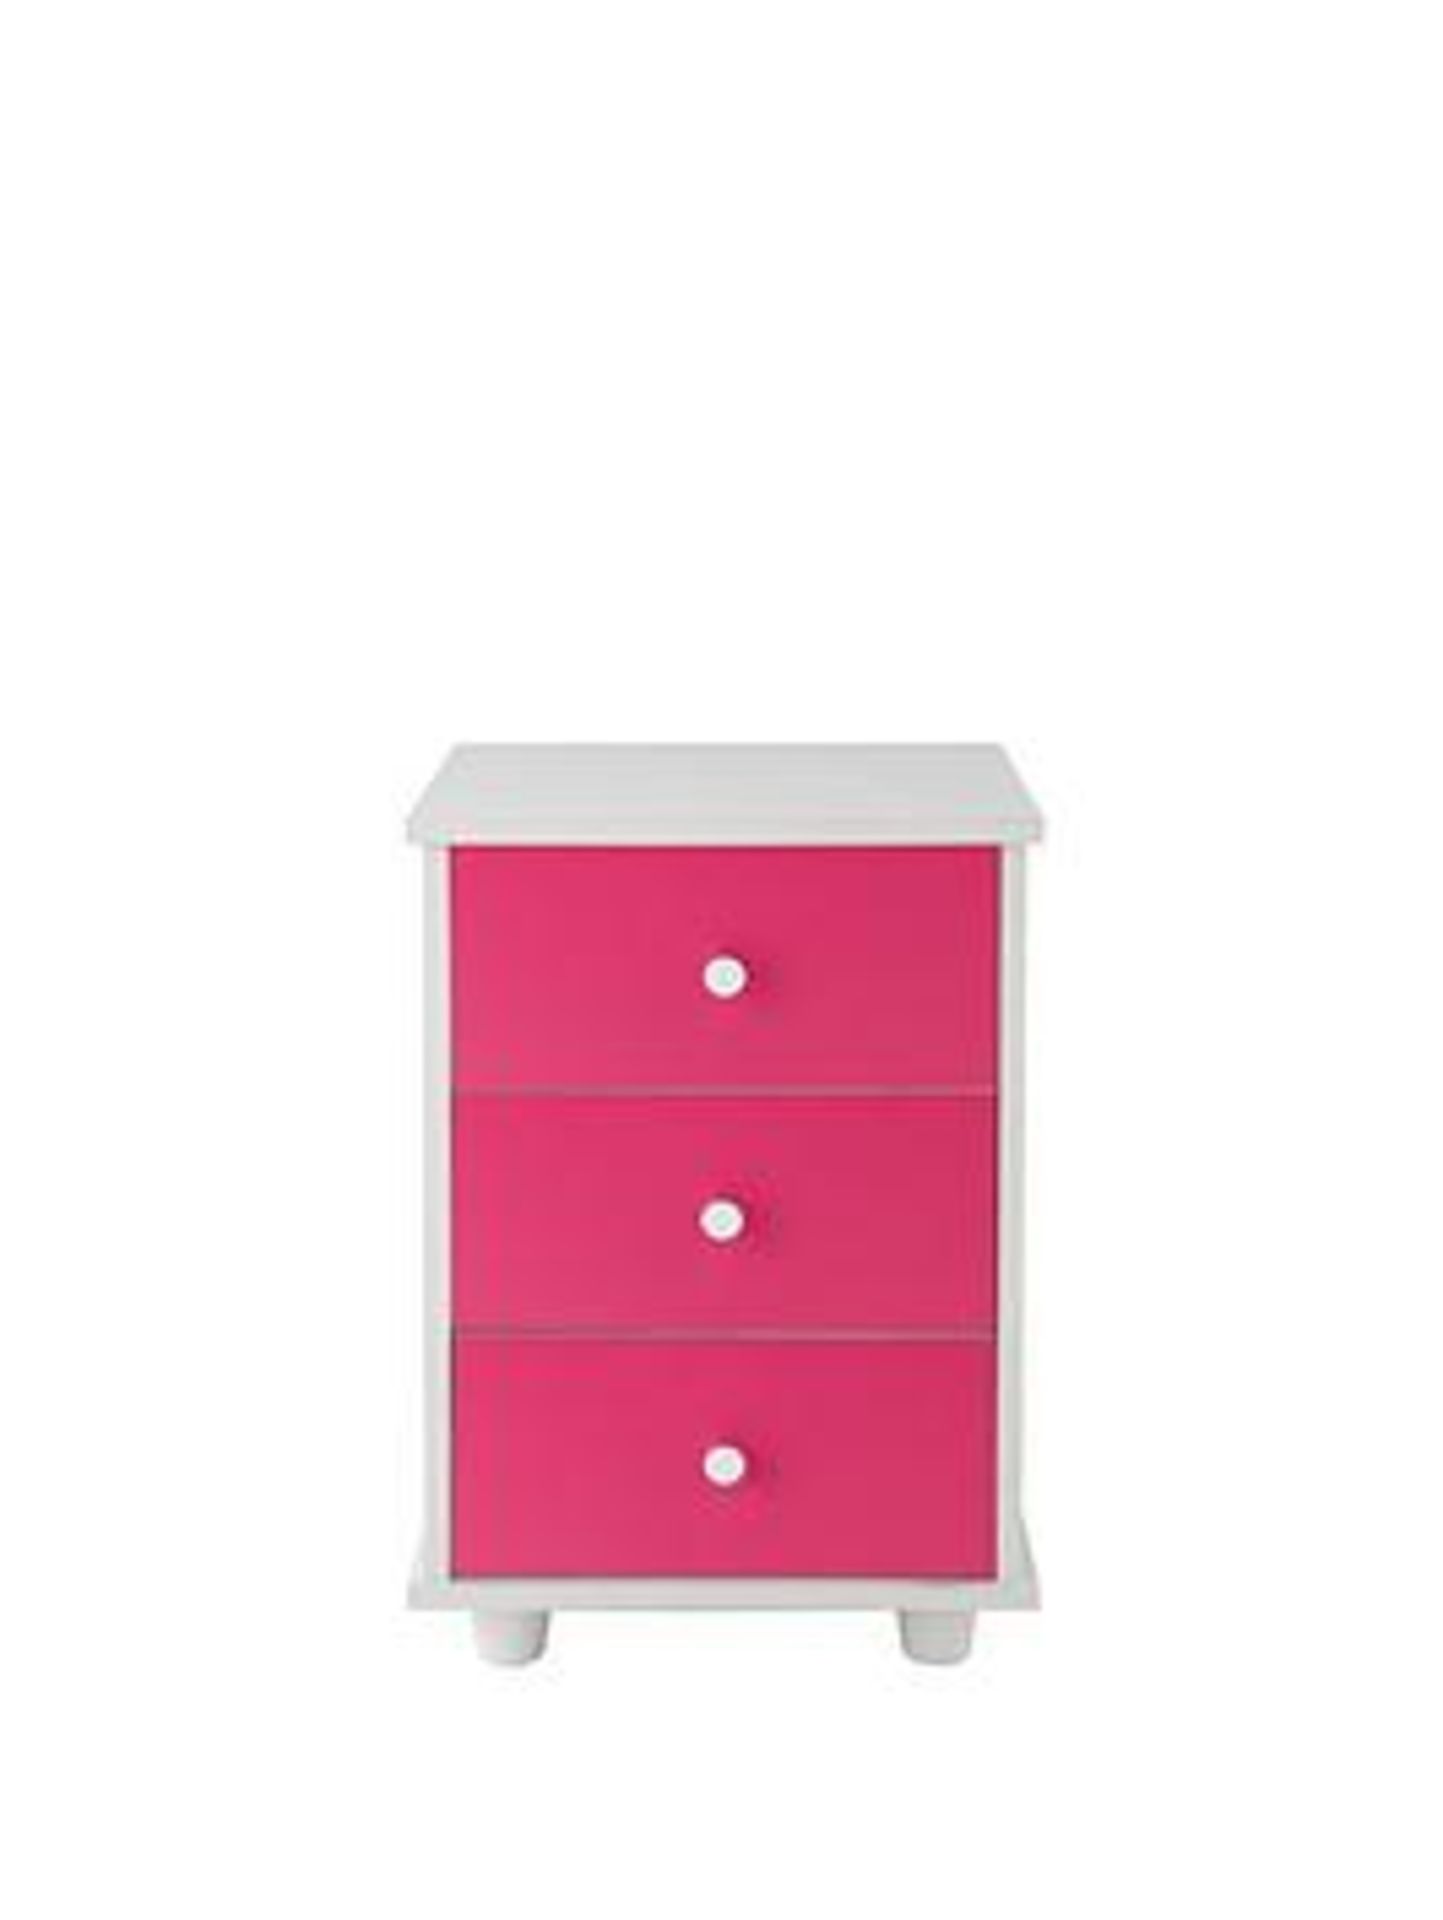 Boxed Item Miami 3 Drawers Bedside [Pink] 59X41X40Cm Rrp:£70.0